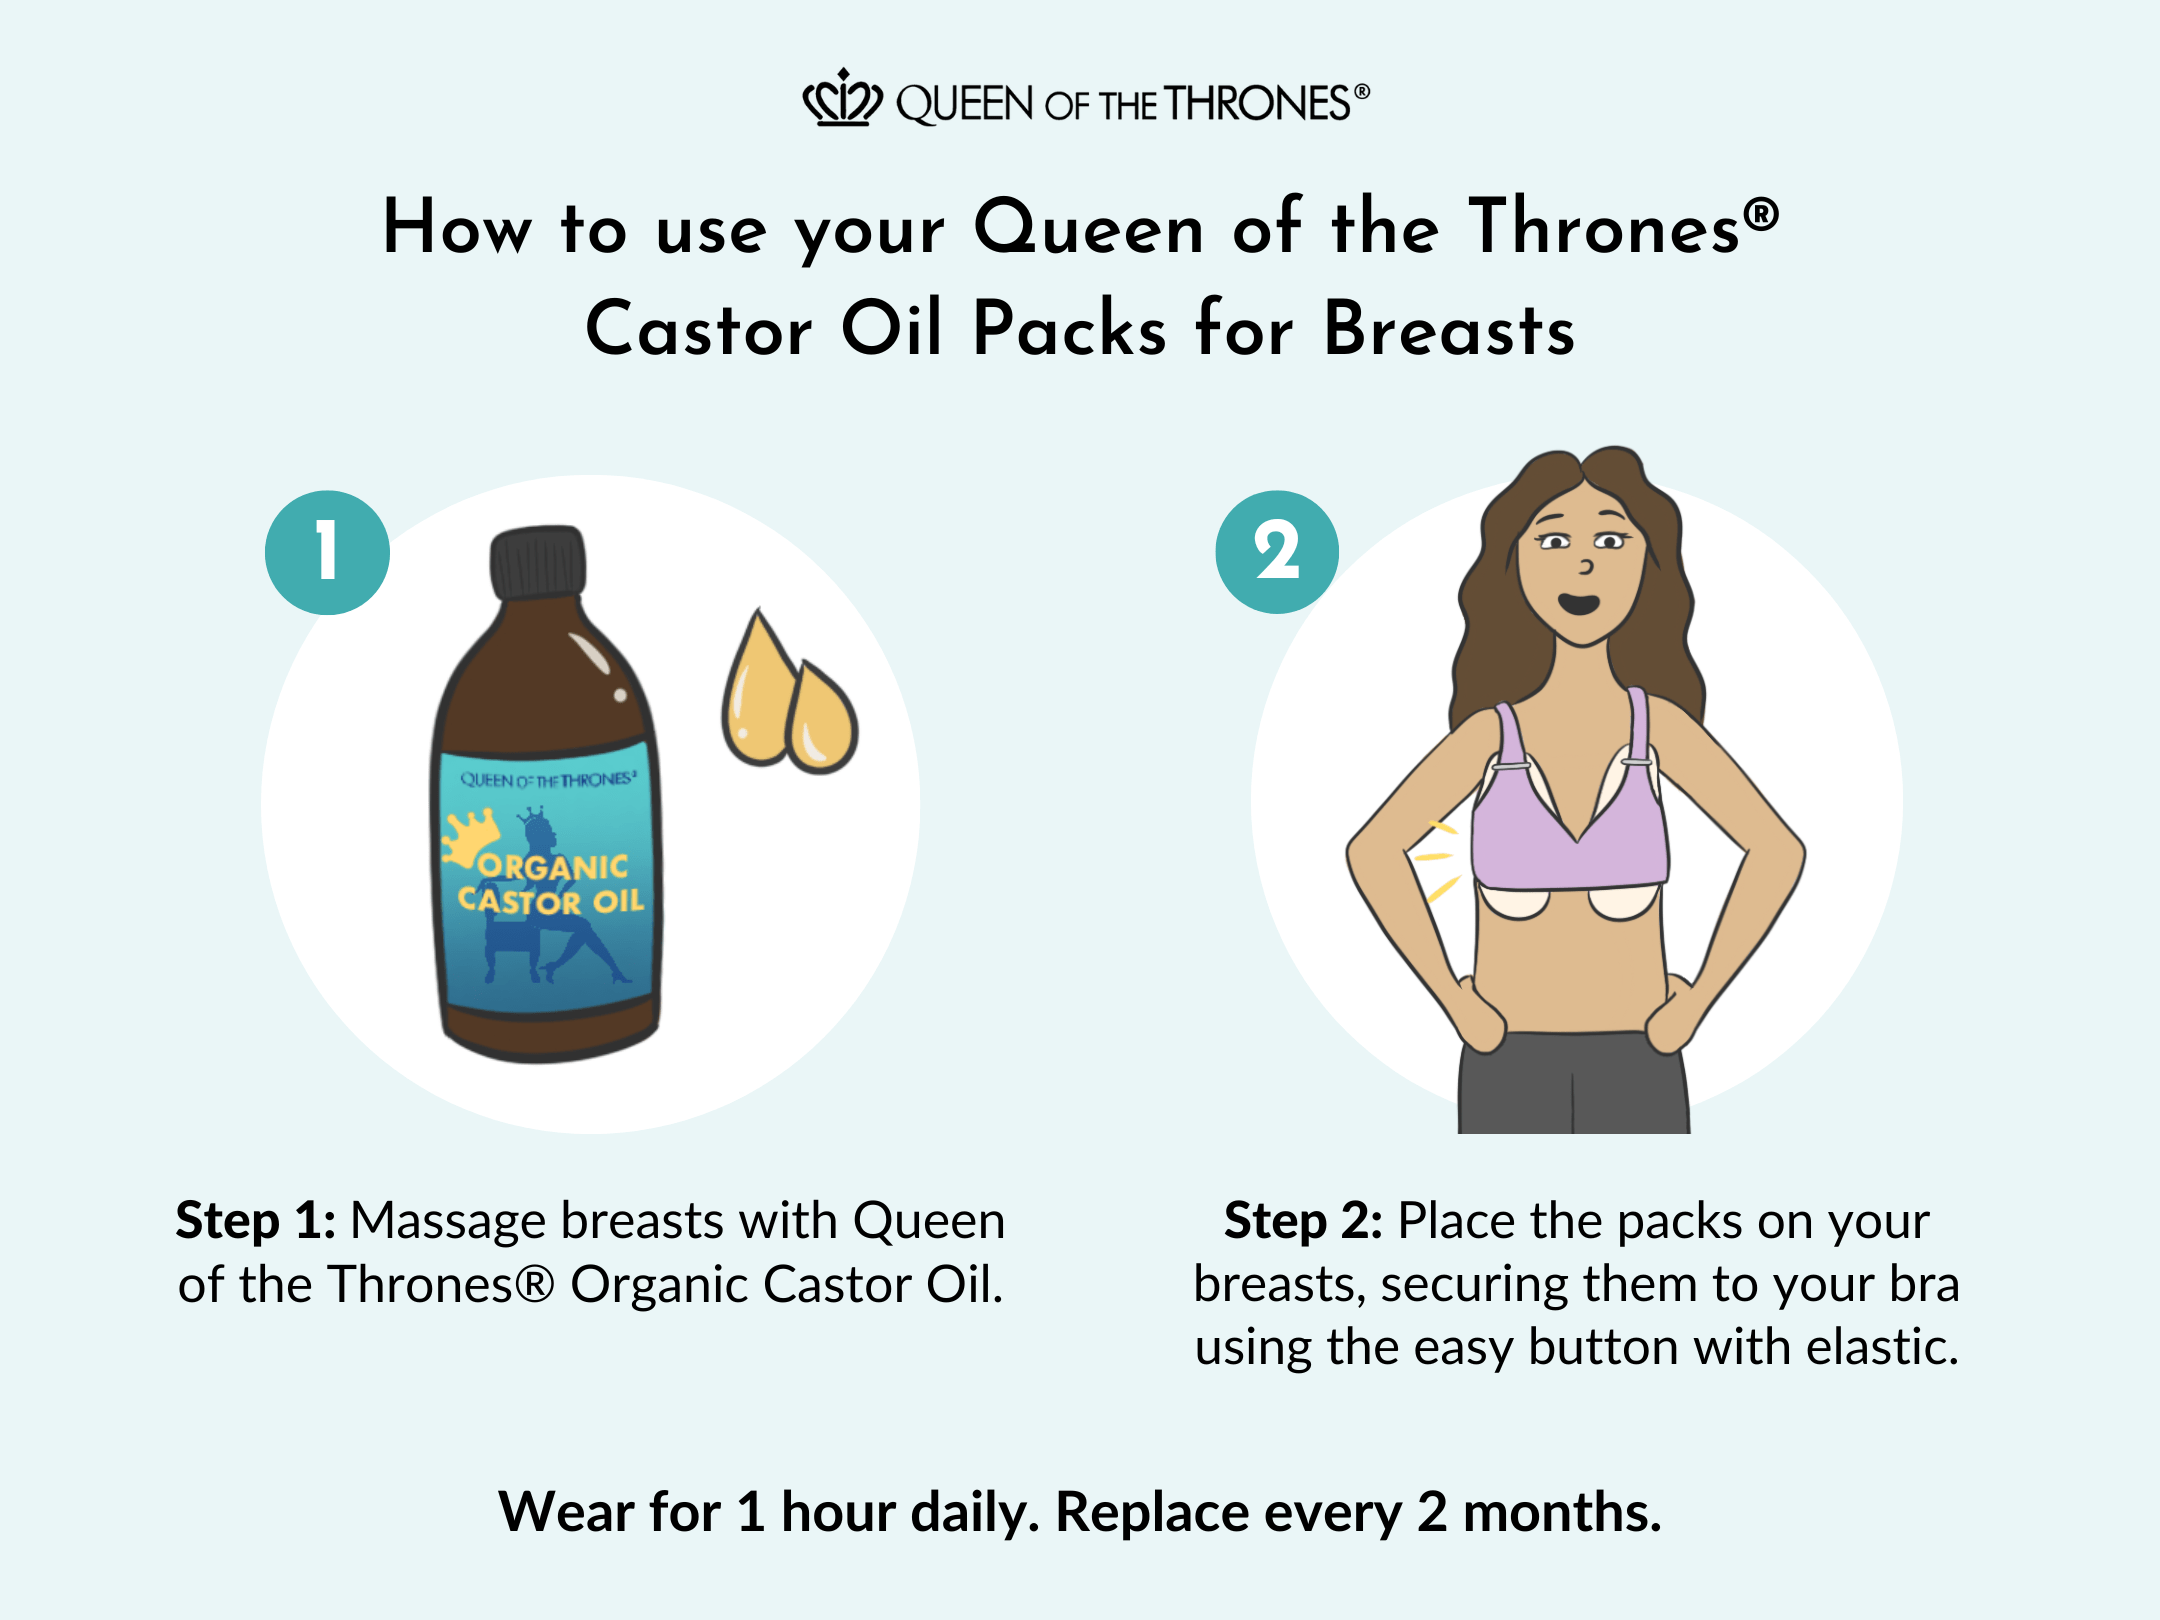 How to Breast Packs by Queen of the Thrones